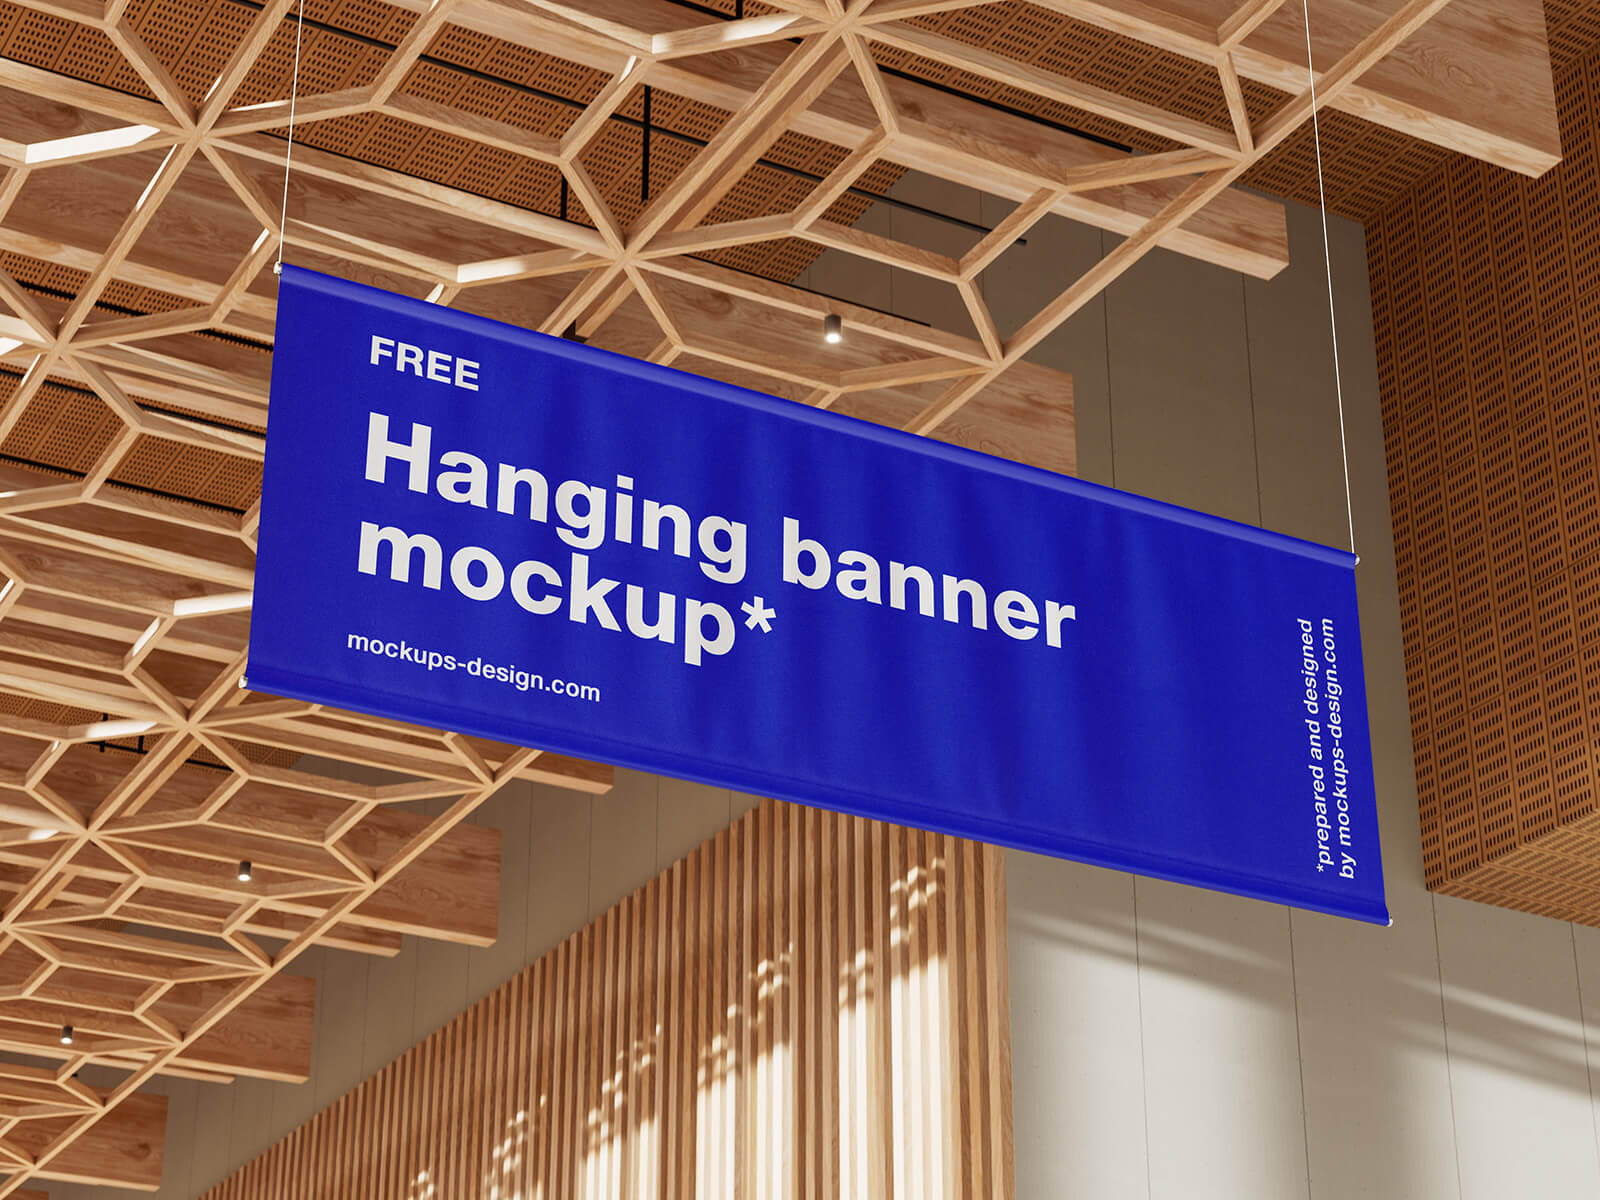 3 Free Expo Hall Ceiling Hanging Banner Mockup PSD Files